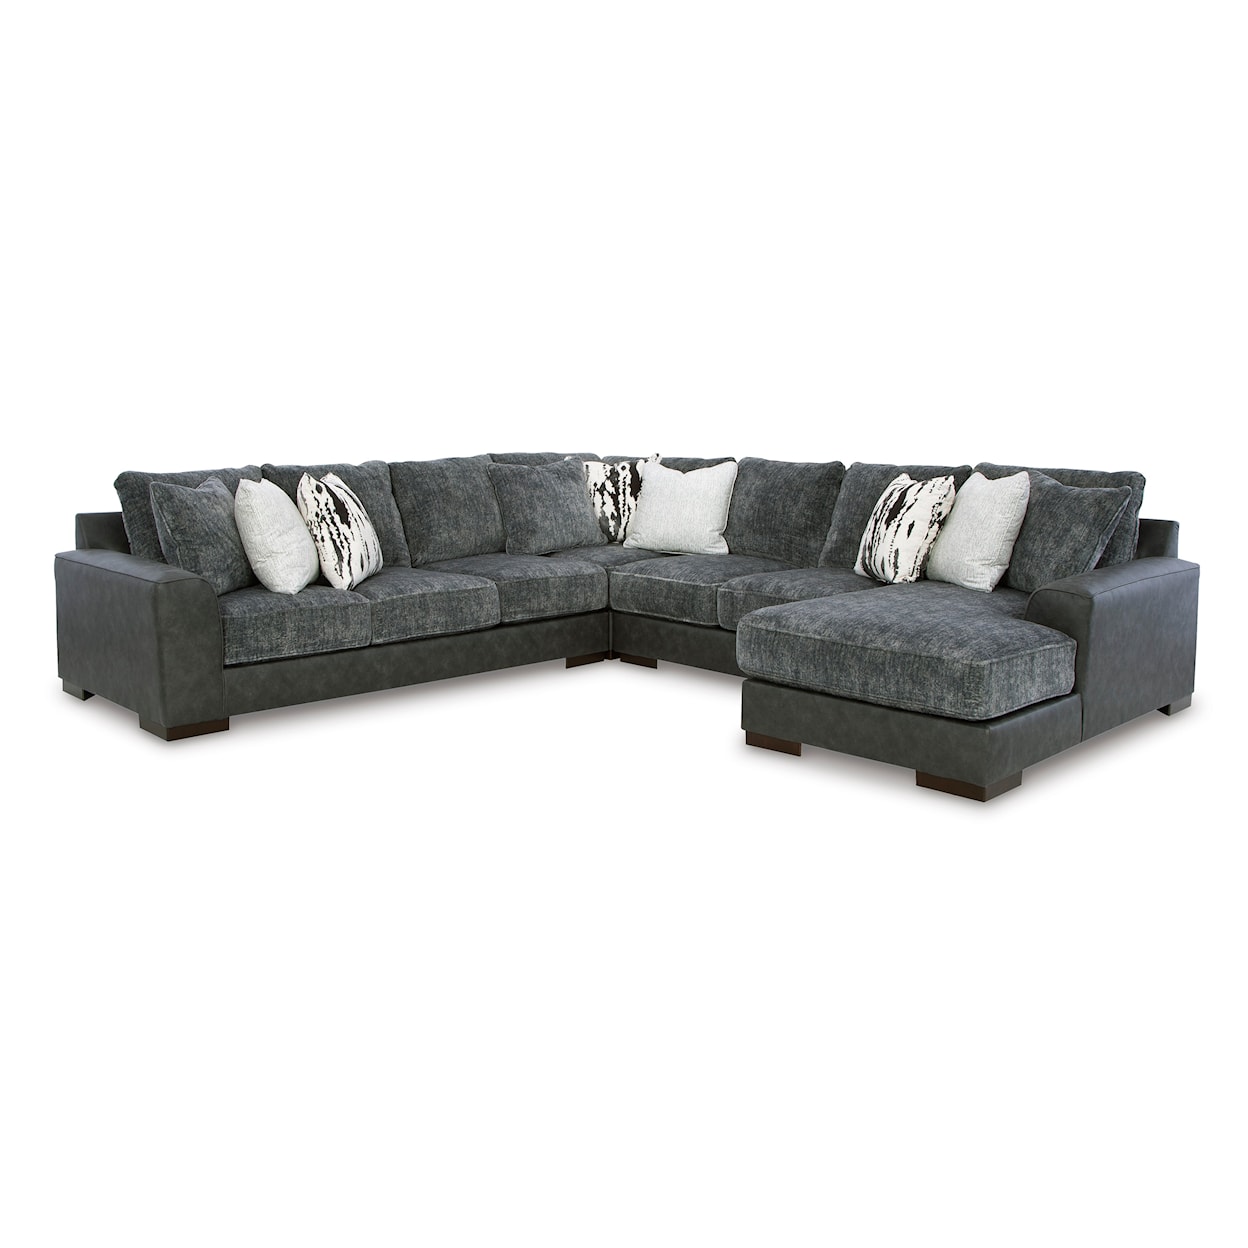 Ashley Furniture Signature Design Larkstone Sectional Sofa with Chaise